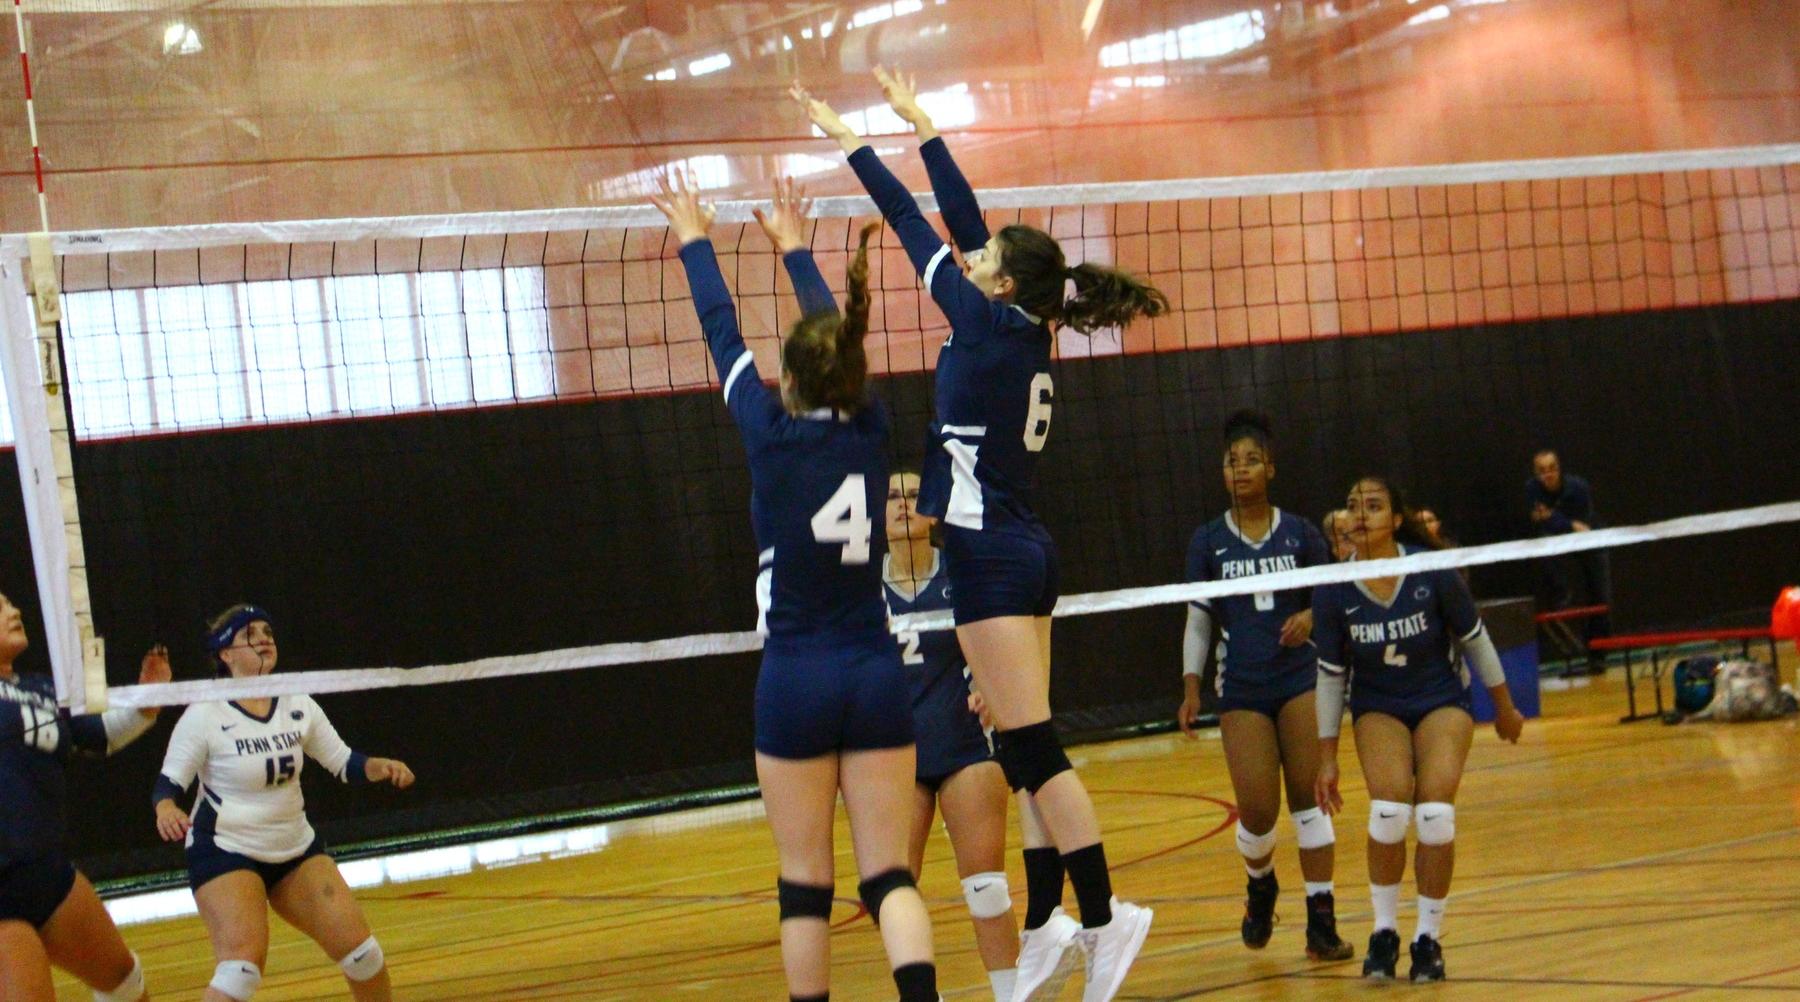 Two TKC volleyball players jump at the net attempting a block.